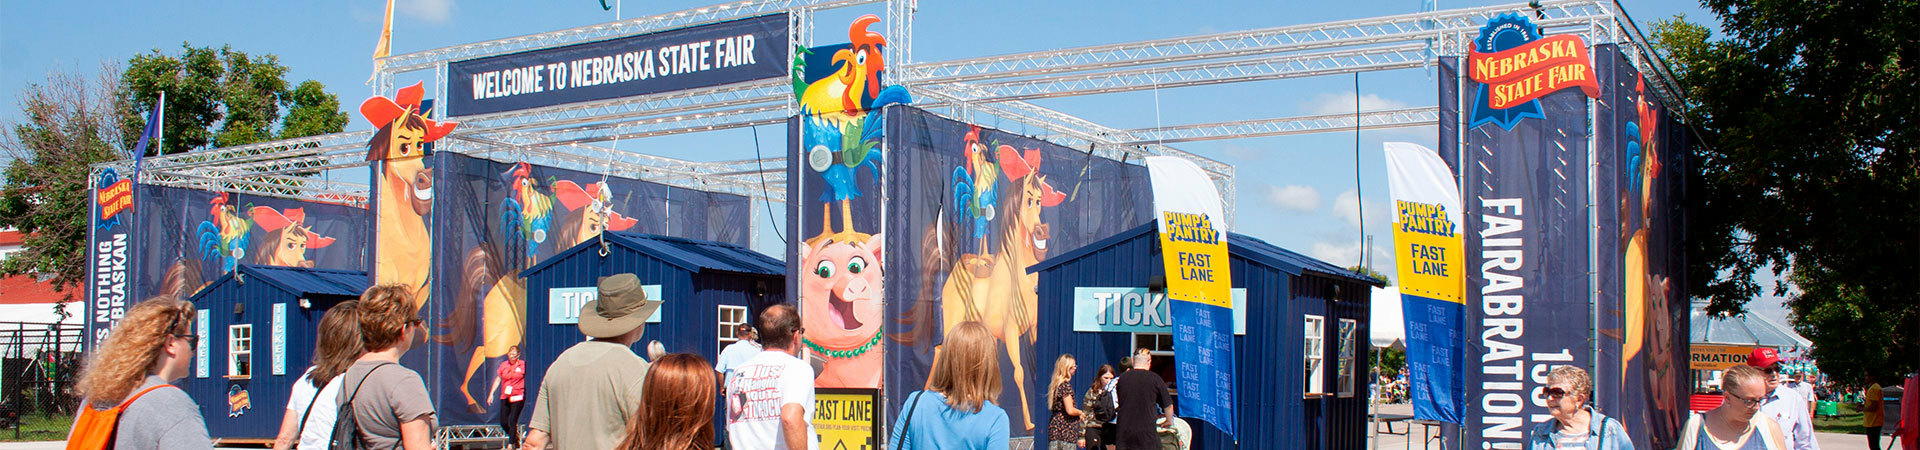 Custom event truss with mesh banners as the entrance at the Nebraska state fair.